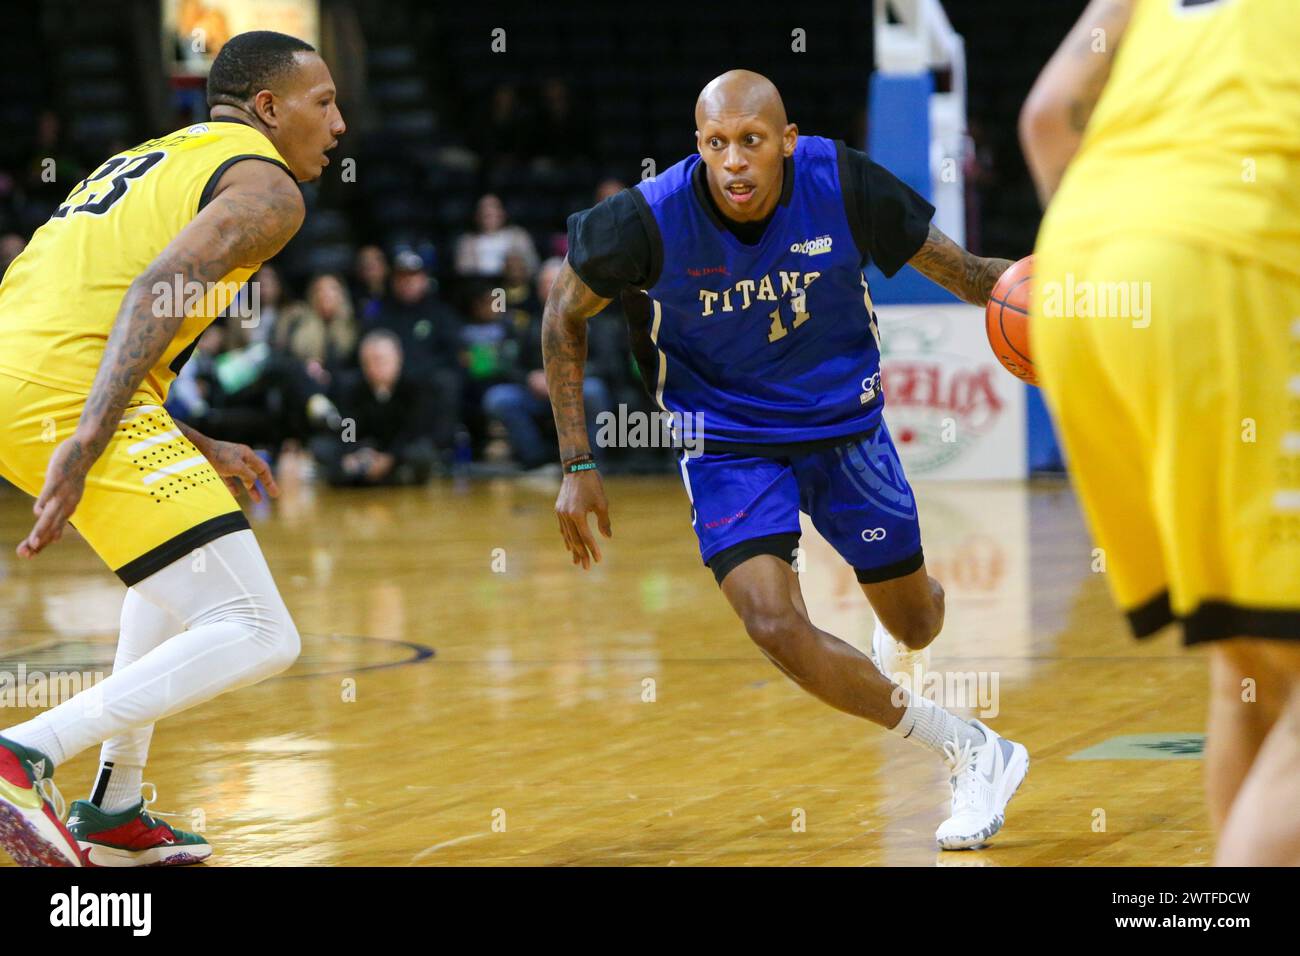 London, Canada. 17th Mar, 2024. London Ontario Canada. March 17 2024, The London Lightning defeat the Kitchener Titans 118-114 in regulation on St. Patrick's Day. Marque Maultsby (11) of Kitchener Titans tries to go around Billy White (23) of London Lightning. Credit: Luke Durda/Alamy Live News Stock Photo